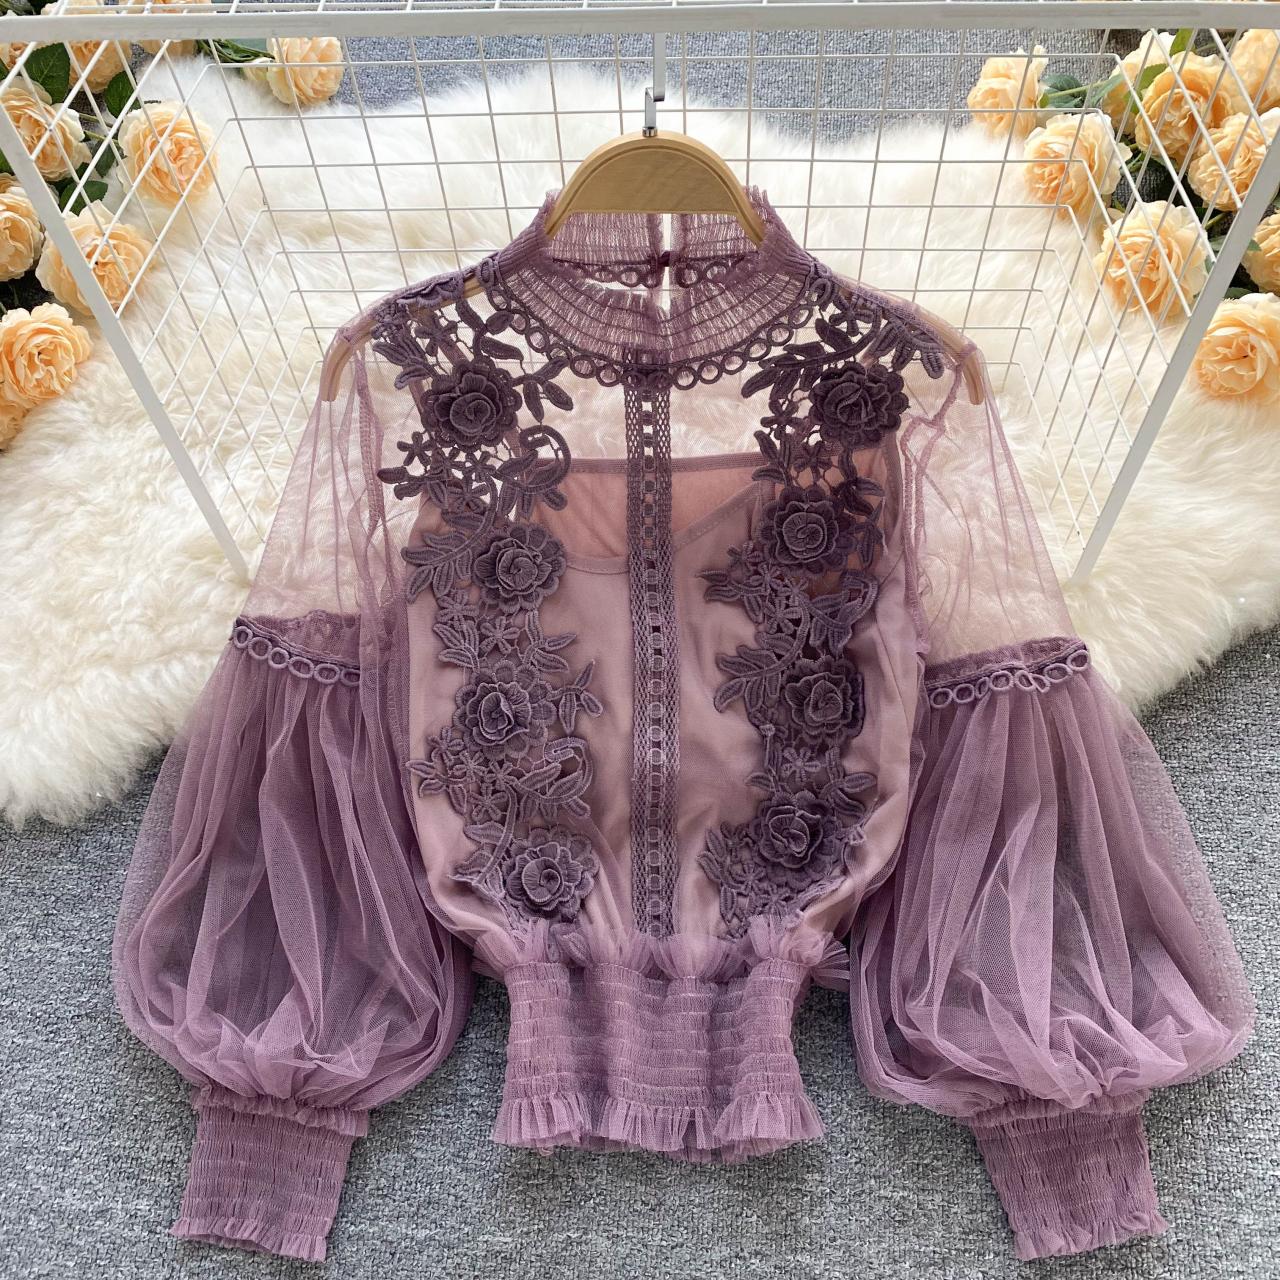 Three-dimensional Flower Collage, Perspective Tulle Top, Lantern Sleeve Slender Short Shirt, Lace Bottom Shirt